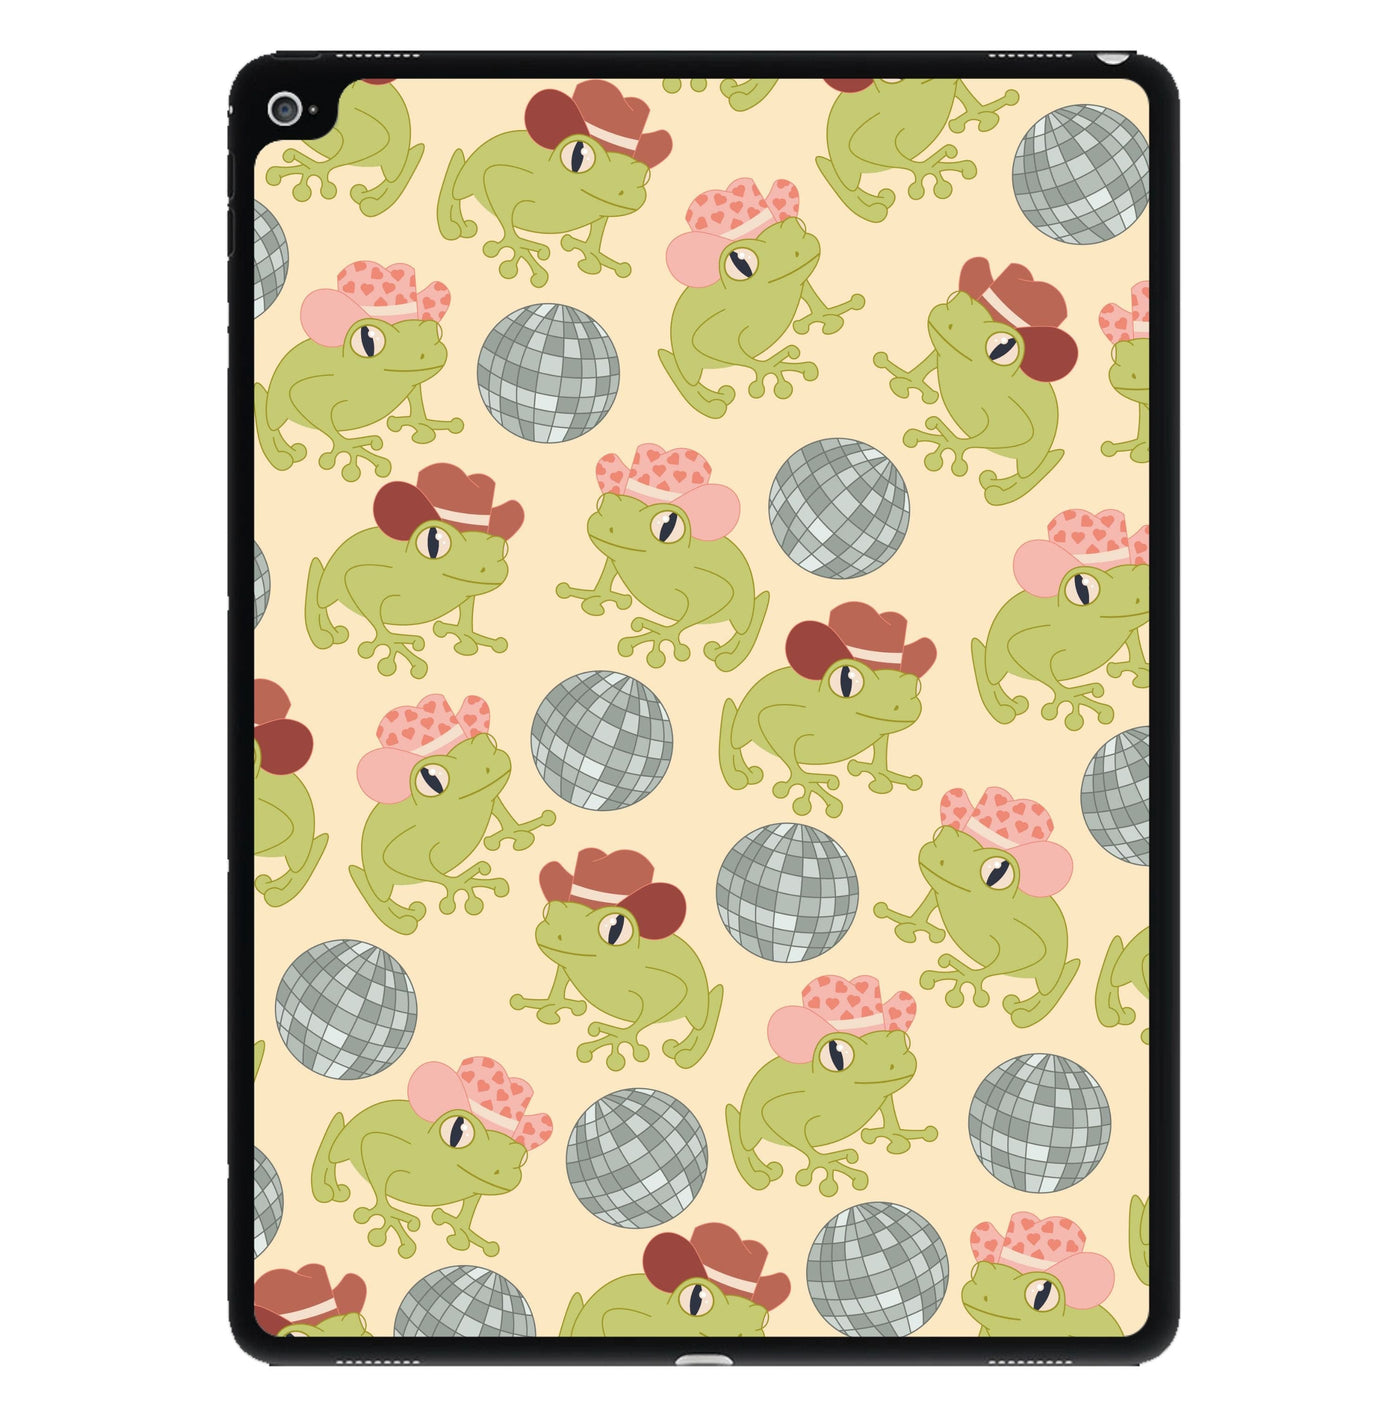 Frogs With Cowboy Hats - Western  iPad Case